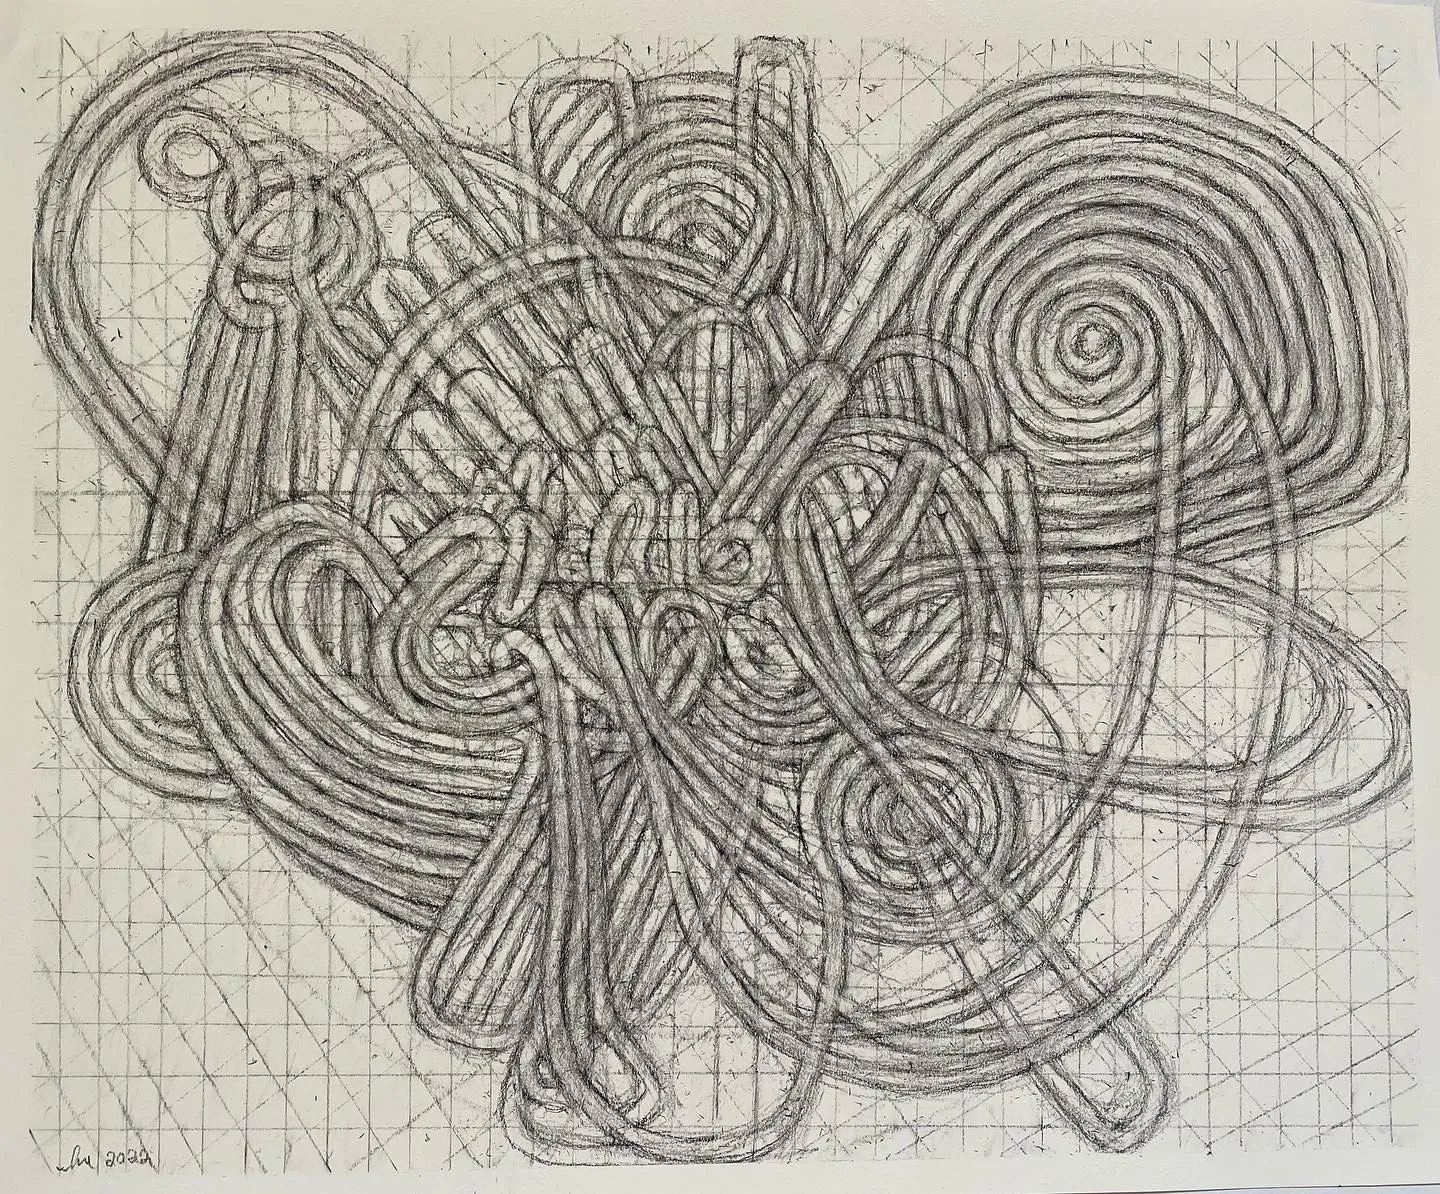 A graphite drawing of strings twisting in complex, overlapping configurations